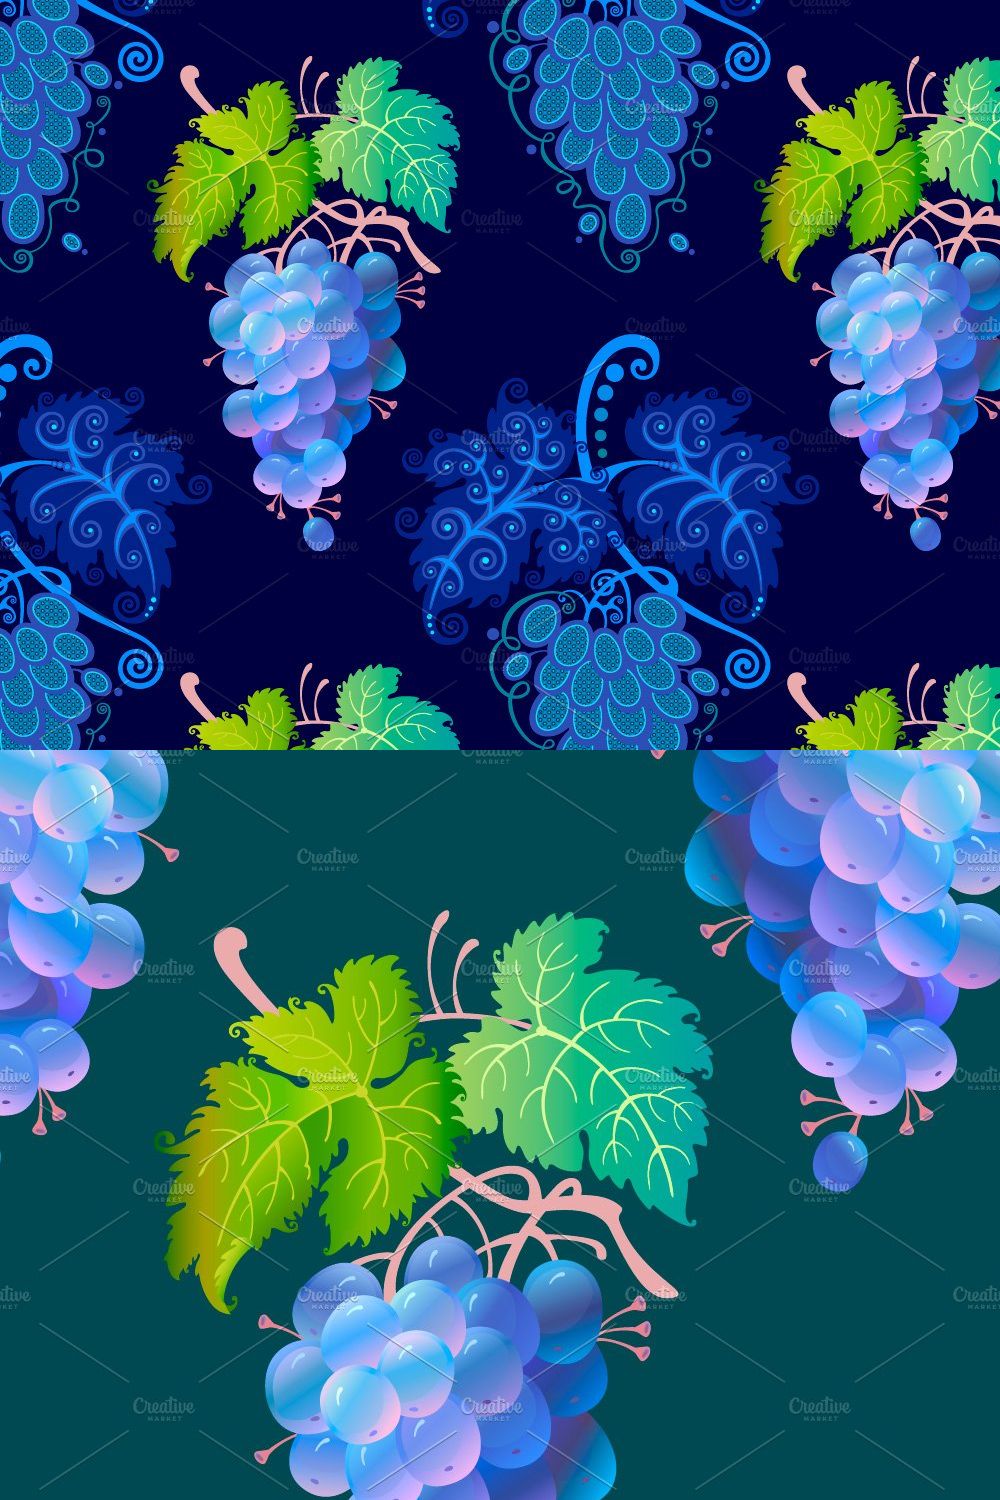 Grapes. Art and pattern pinterest preview image.